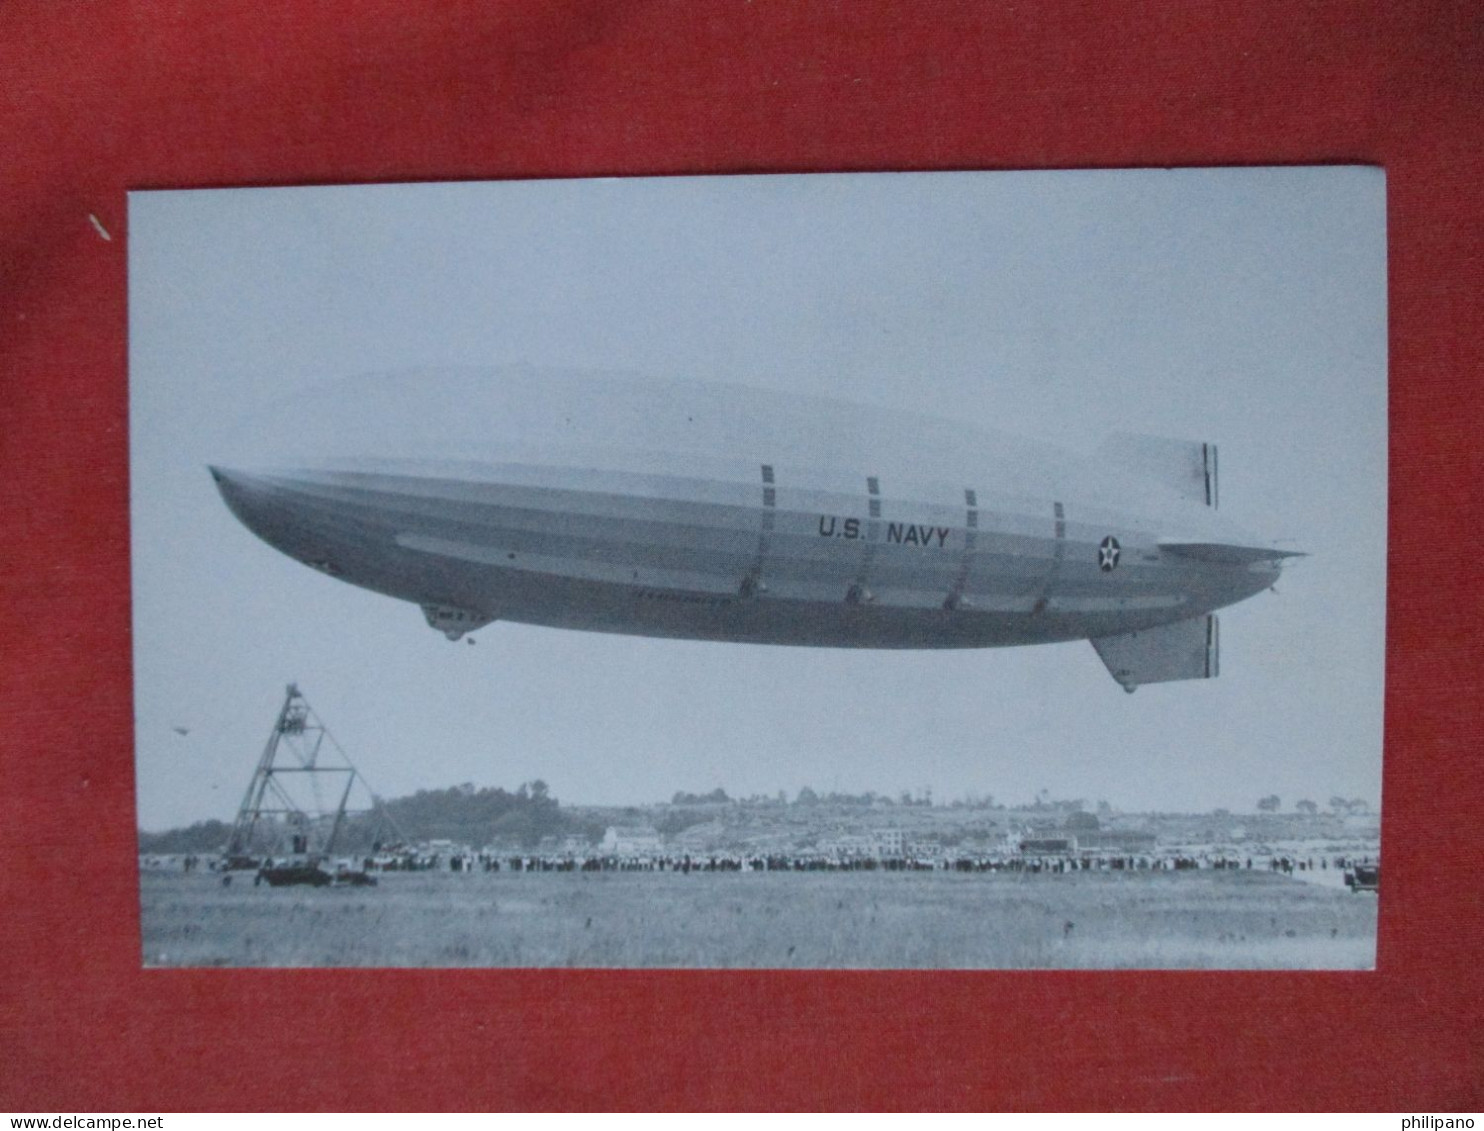 USS Akron       Airship  Rubber City Stamp Club Akron Ohio.  Zeppelin Ref 6404 - Airships